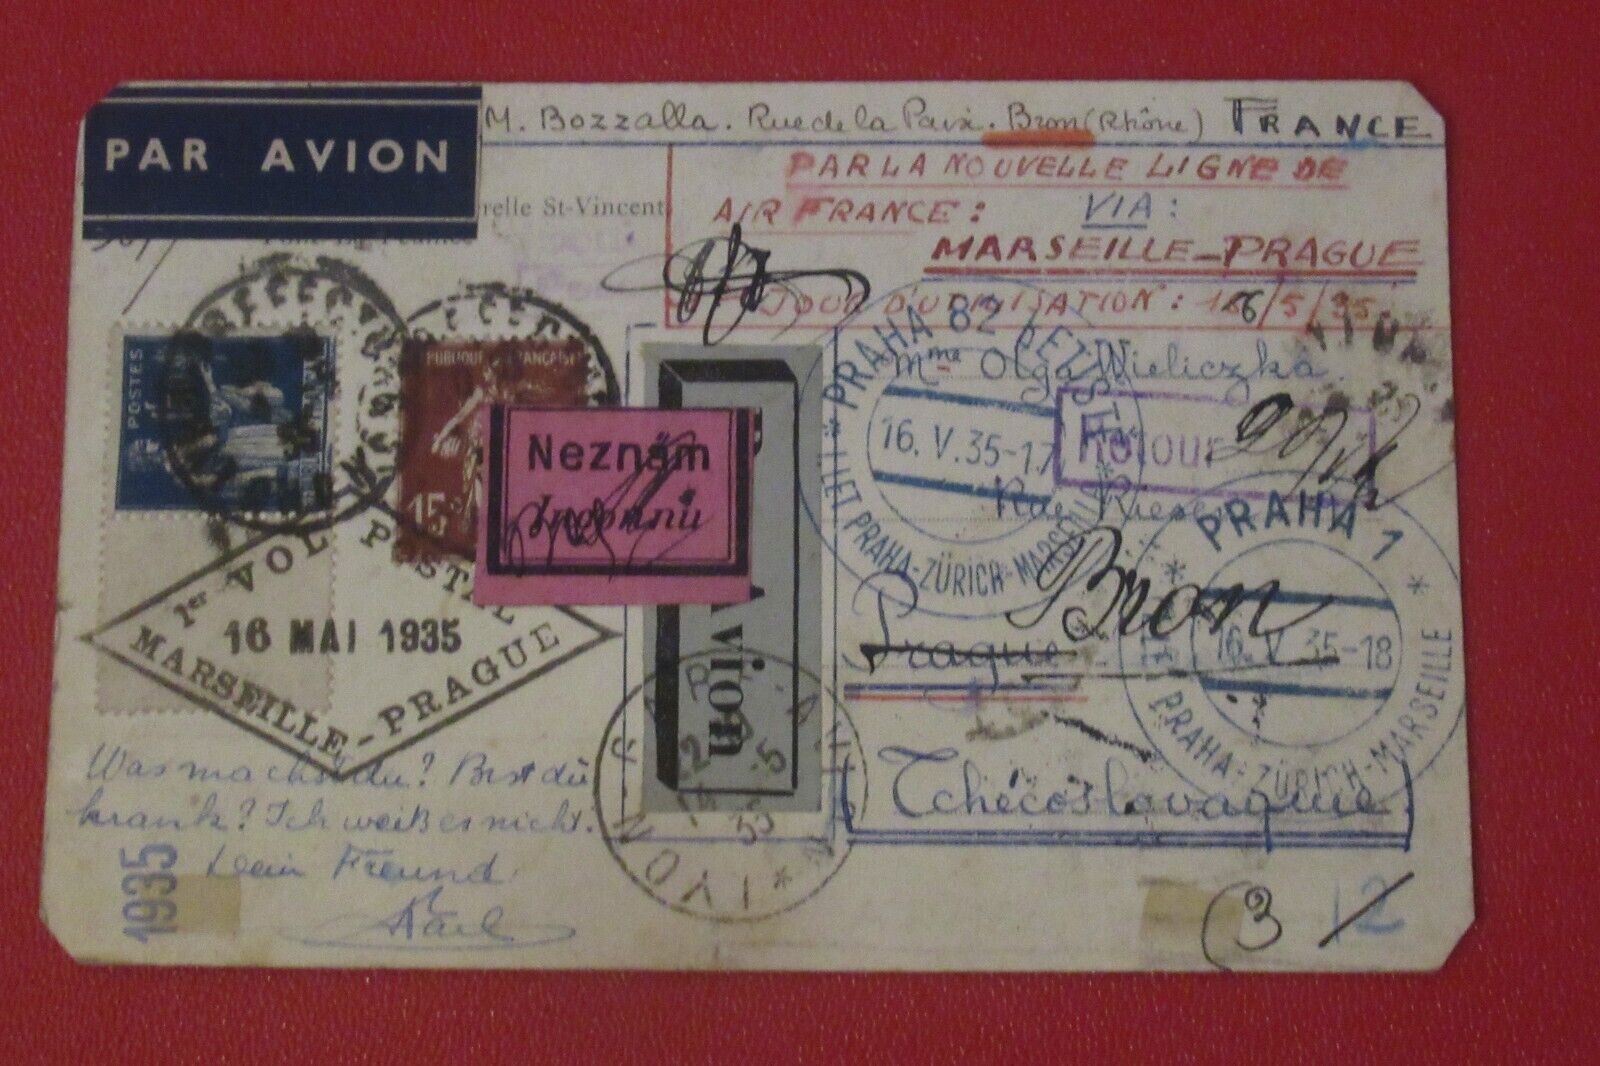 letter from BRON (RHONE) via the 1st MARSEILLE FLIGHT - PRAGUE of 16 May 1935